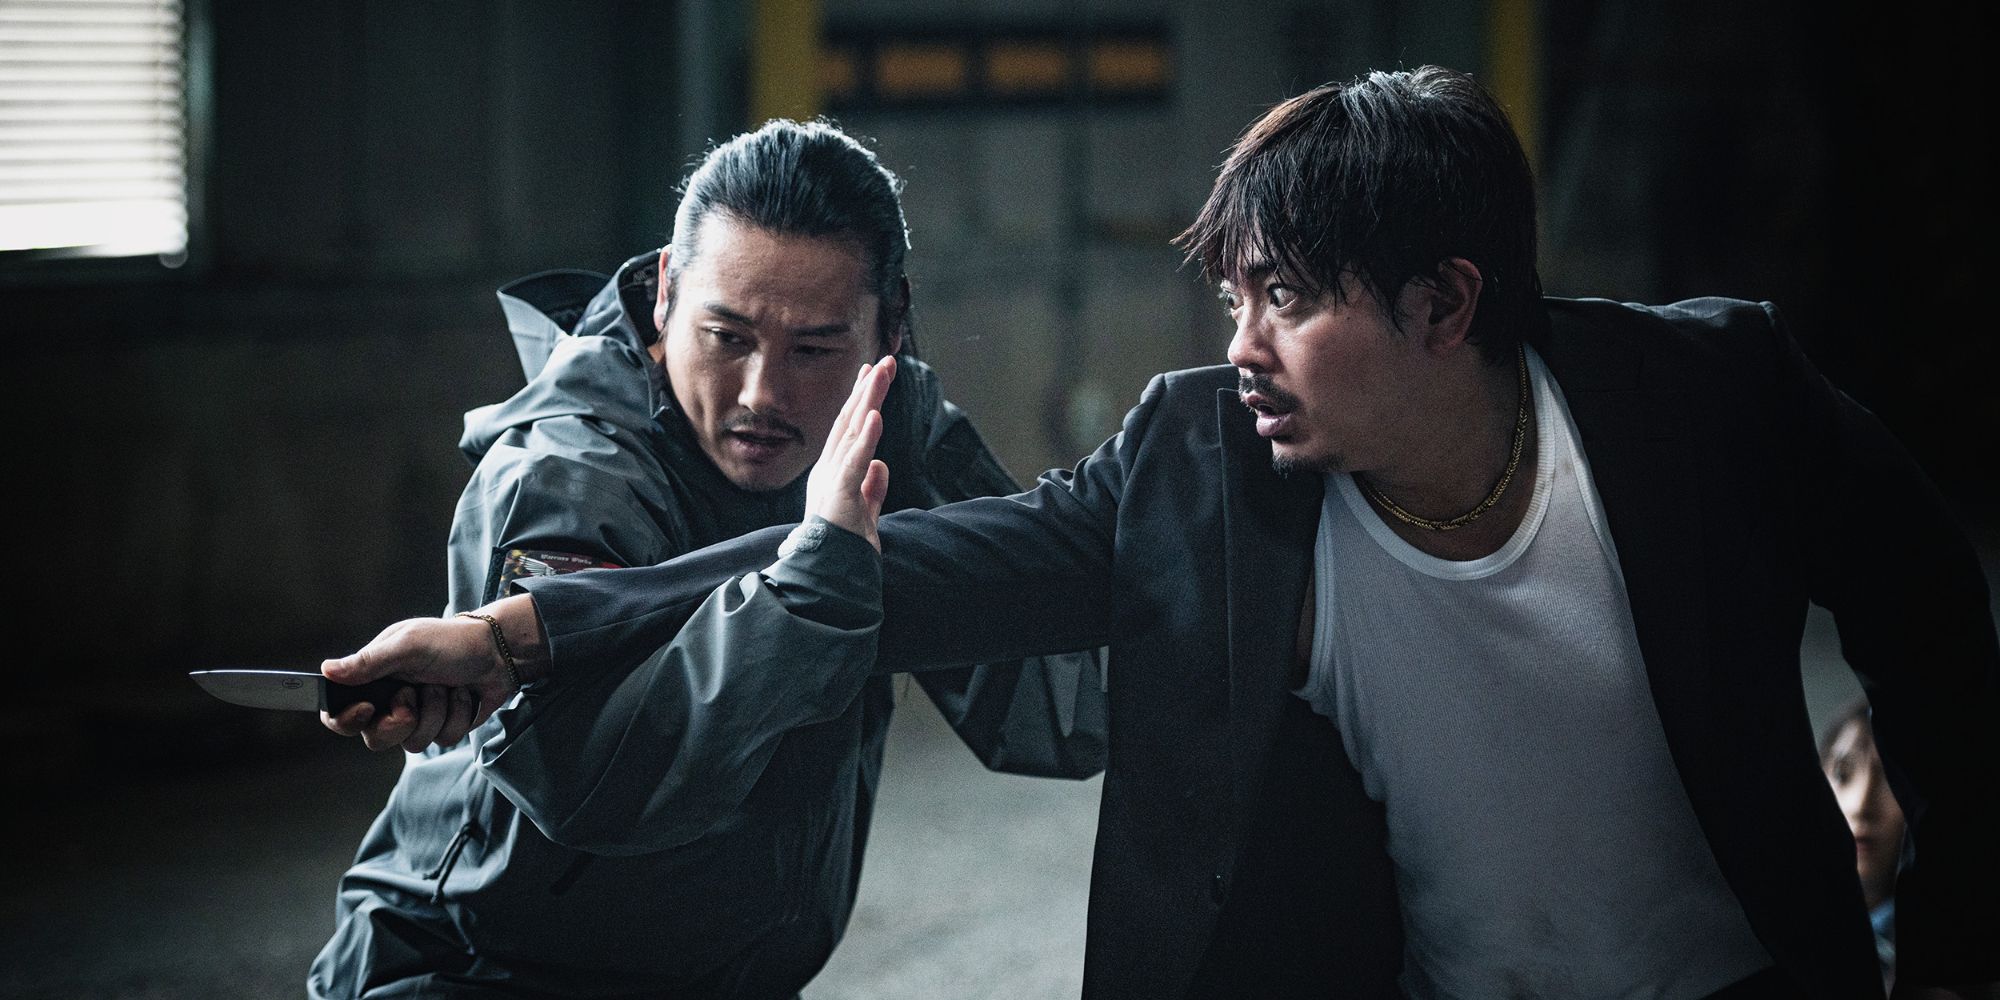 Tak Sakaguchi stopping an attacker with a knife in One Percenter (2023)